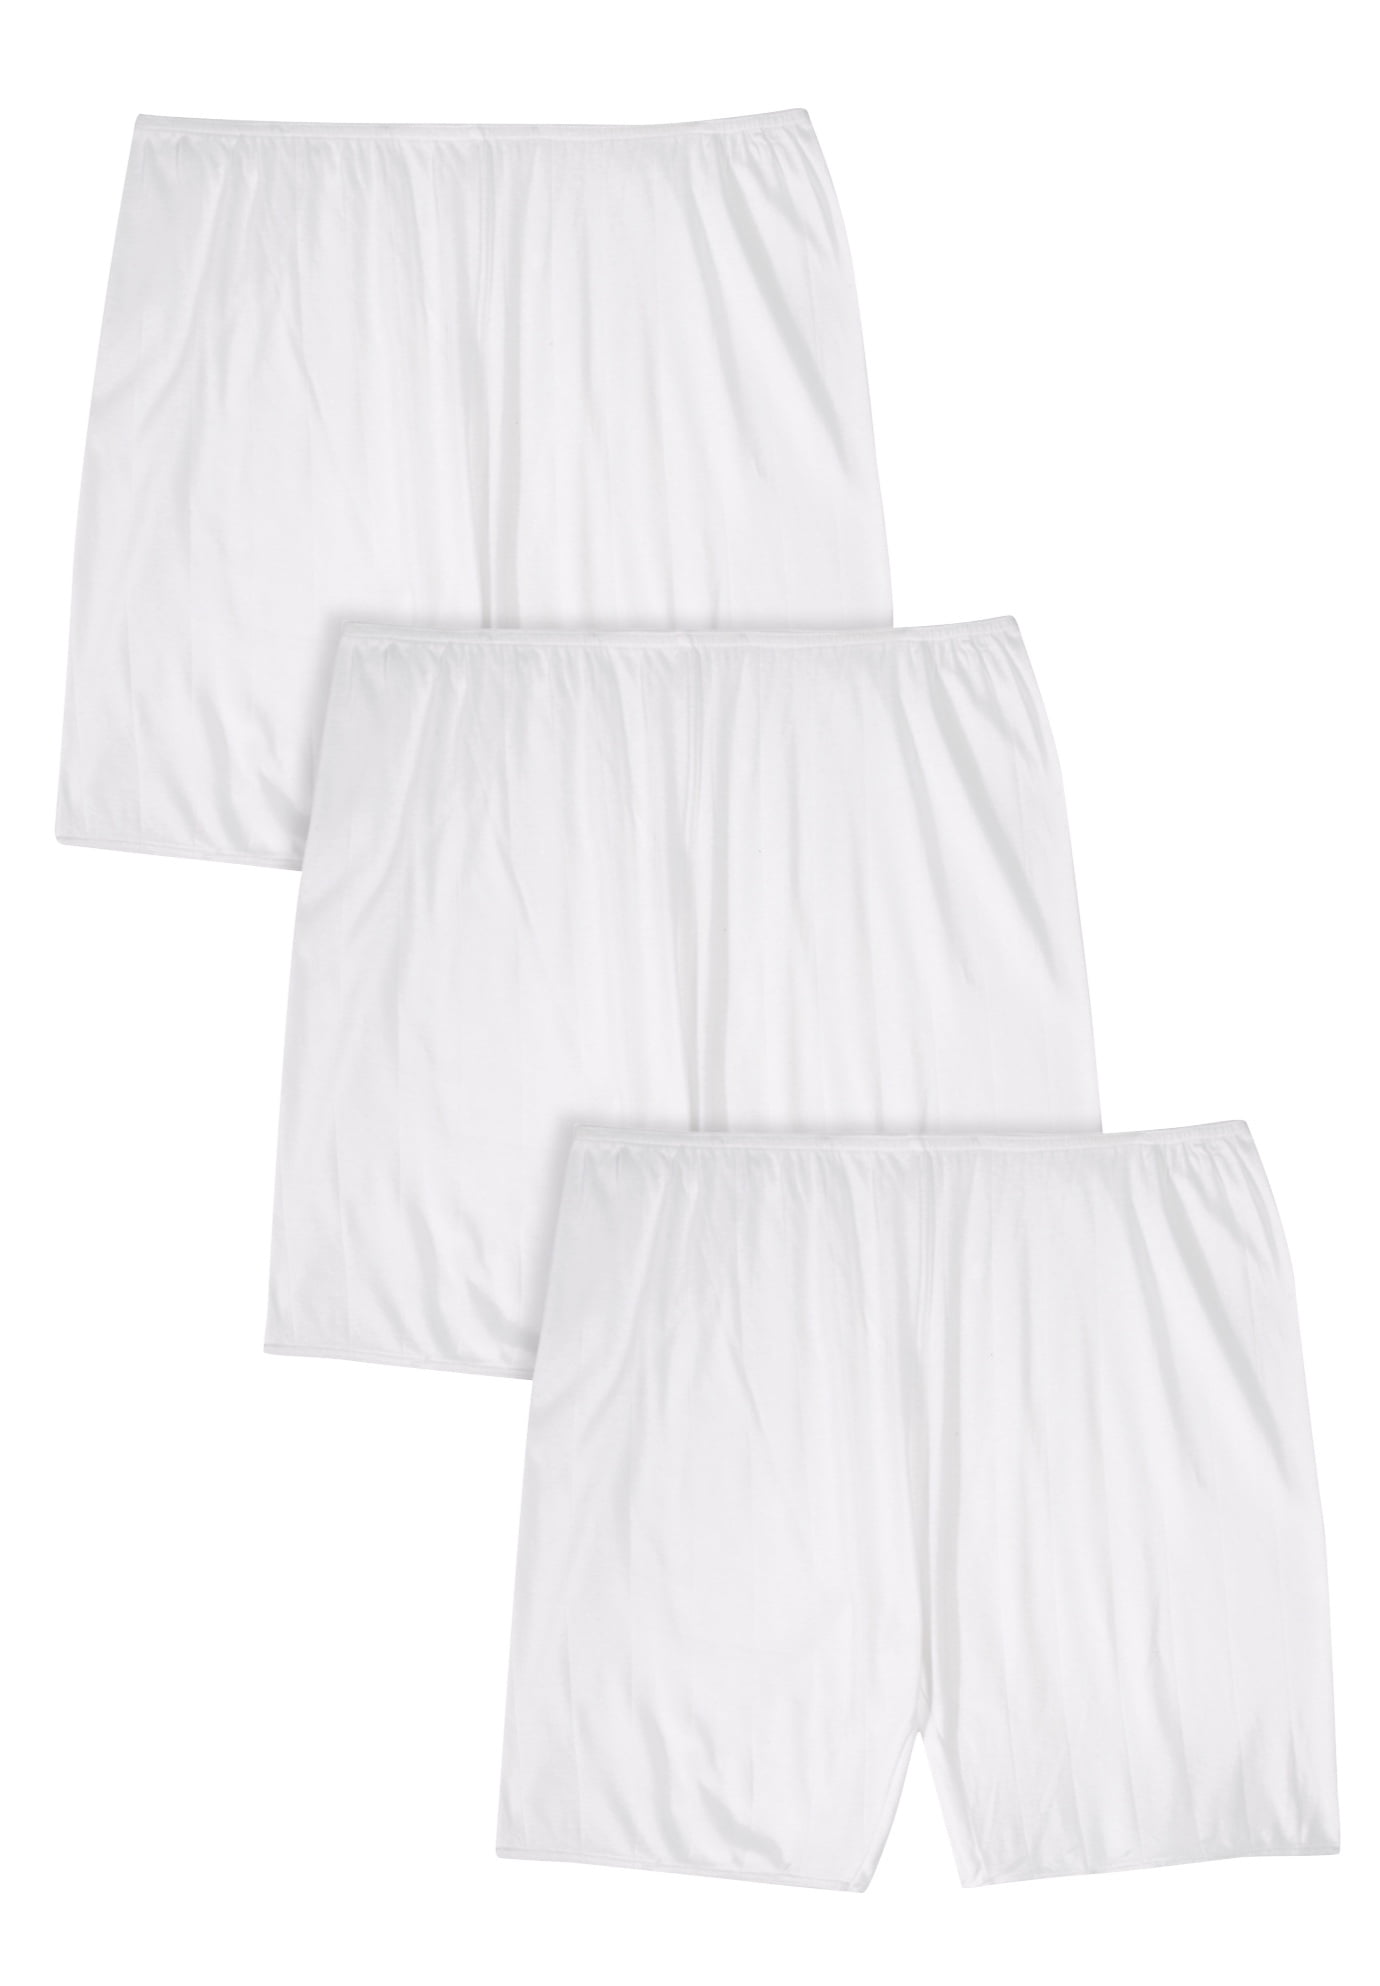 Boutique Short Bloomers Colors & White Custom sizes 2-6 